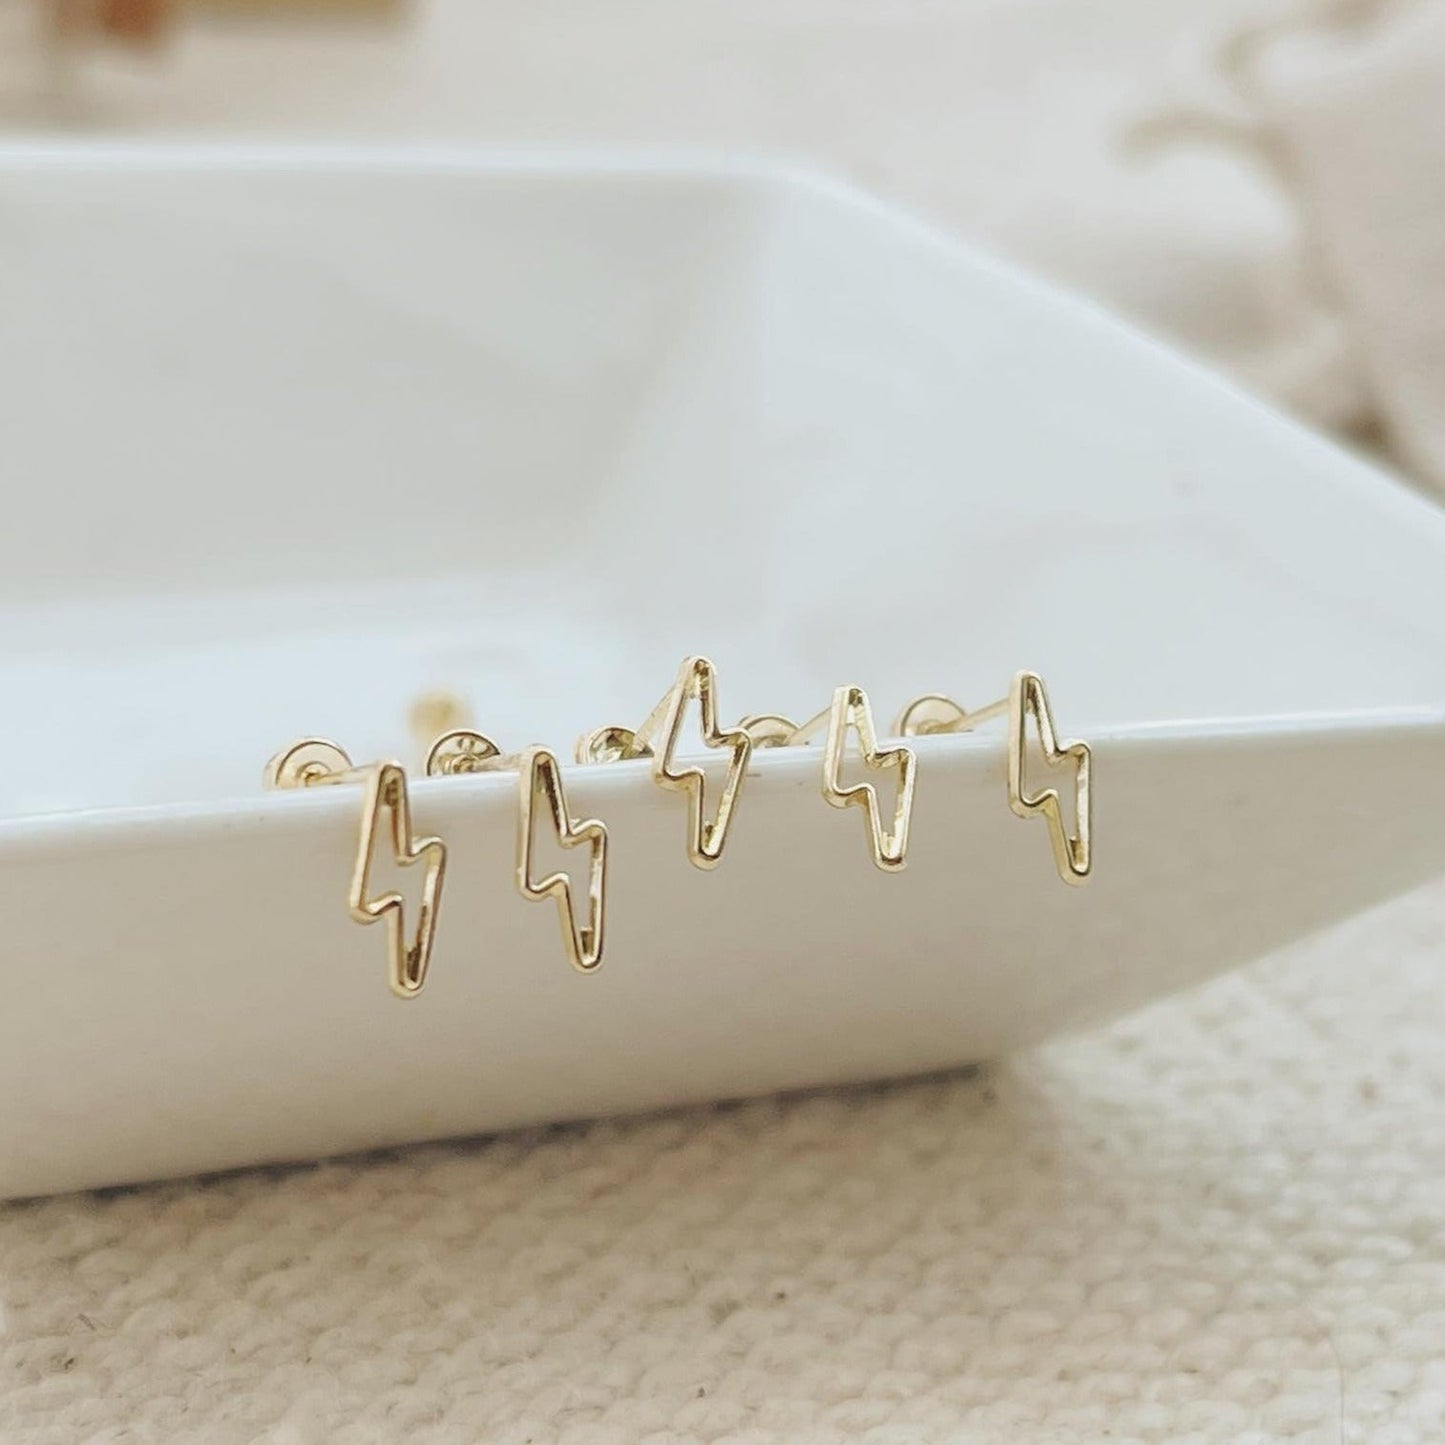 Lightning Bolt Earrings are inspired by the power and beauty of the lightning bolt. These minimalist earrings will add a celestial touch to your outfit and elevate your look